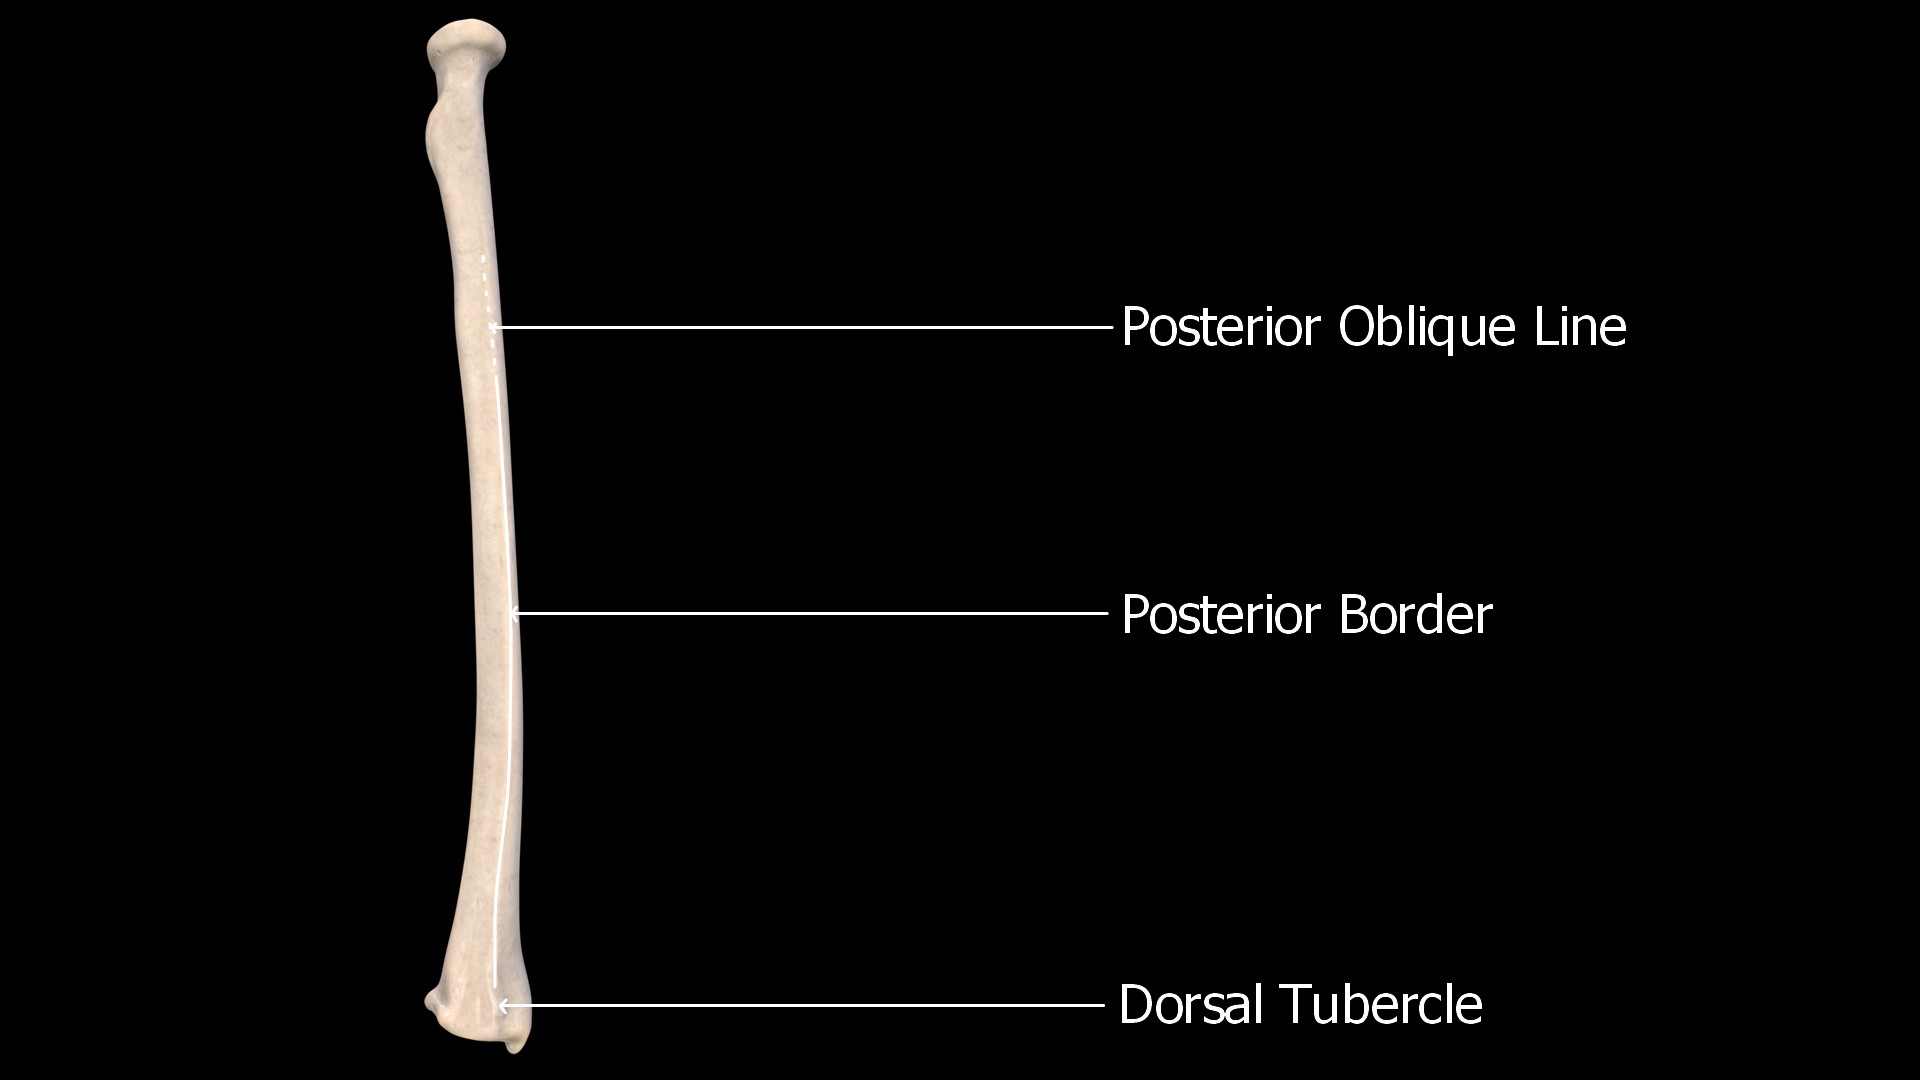 posterior border extends from the posterior oblique line to the dorsal tubercle